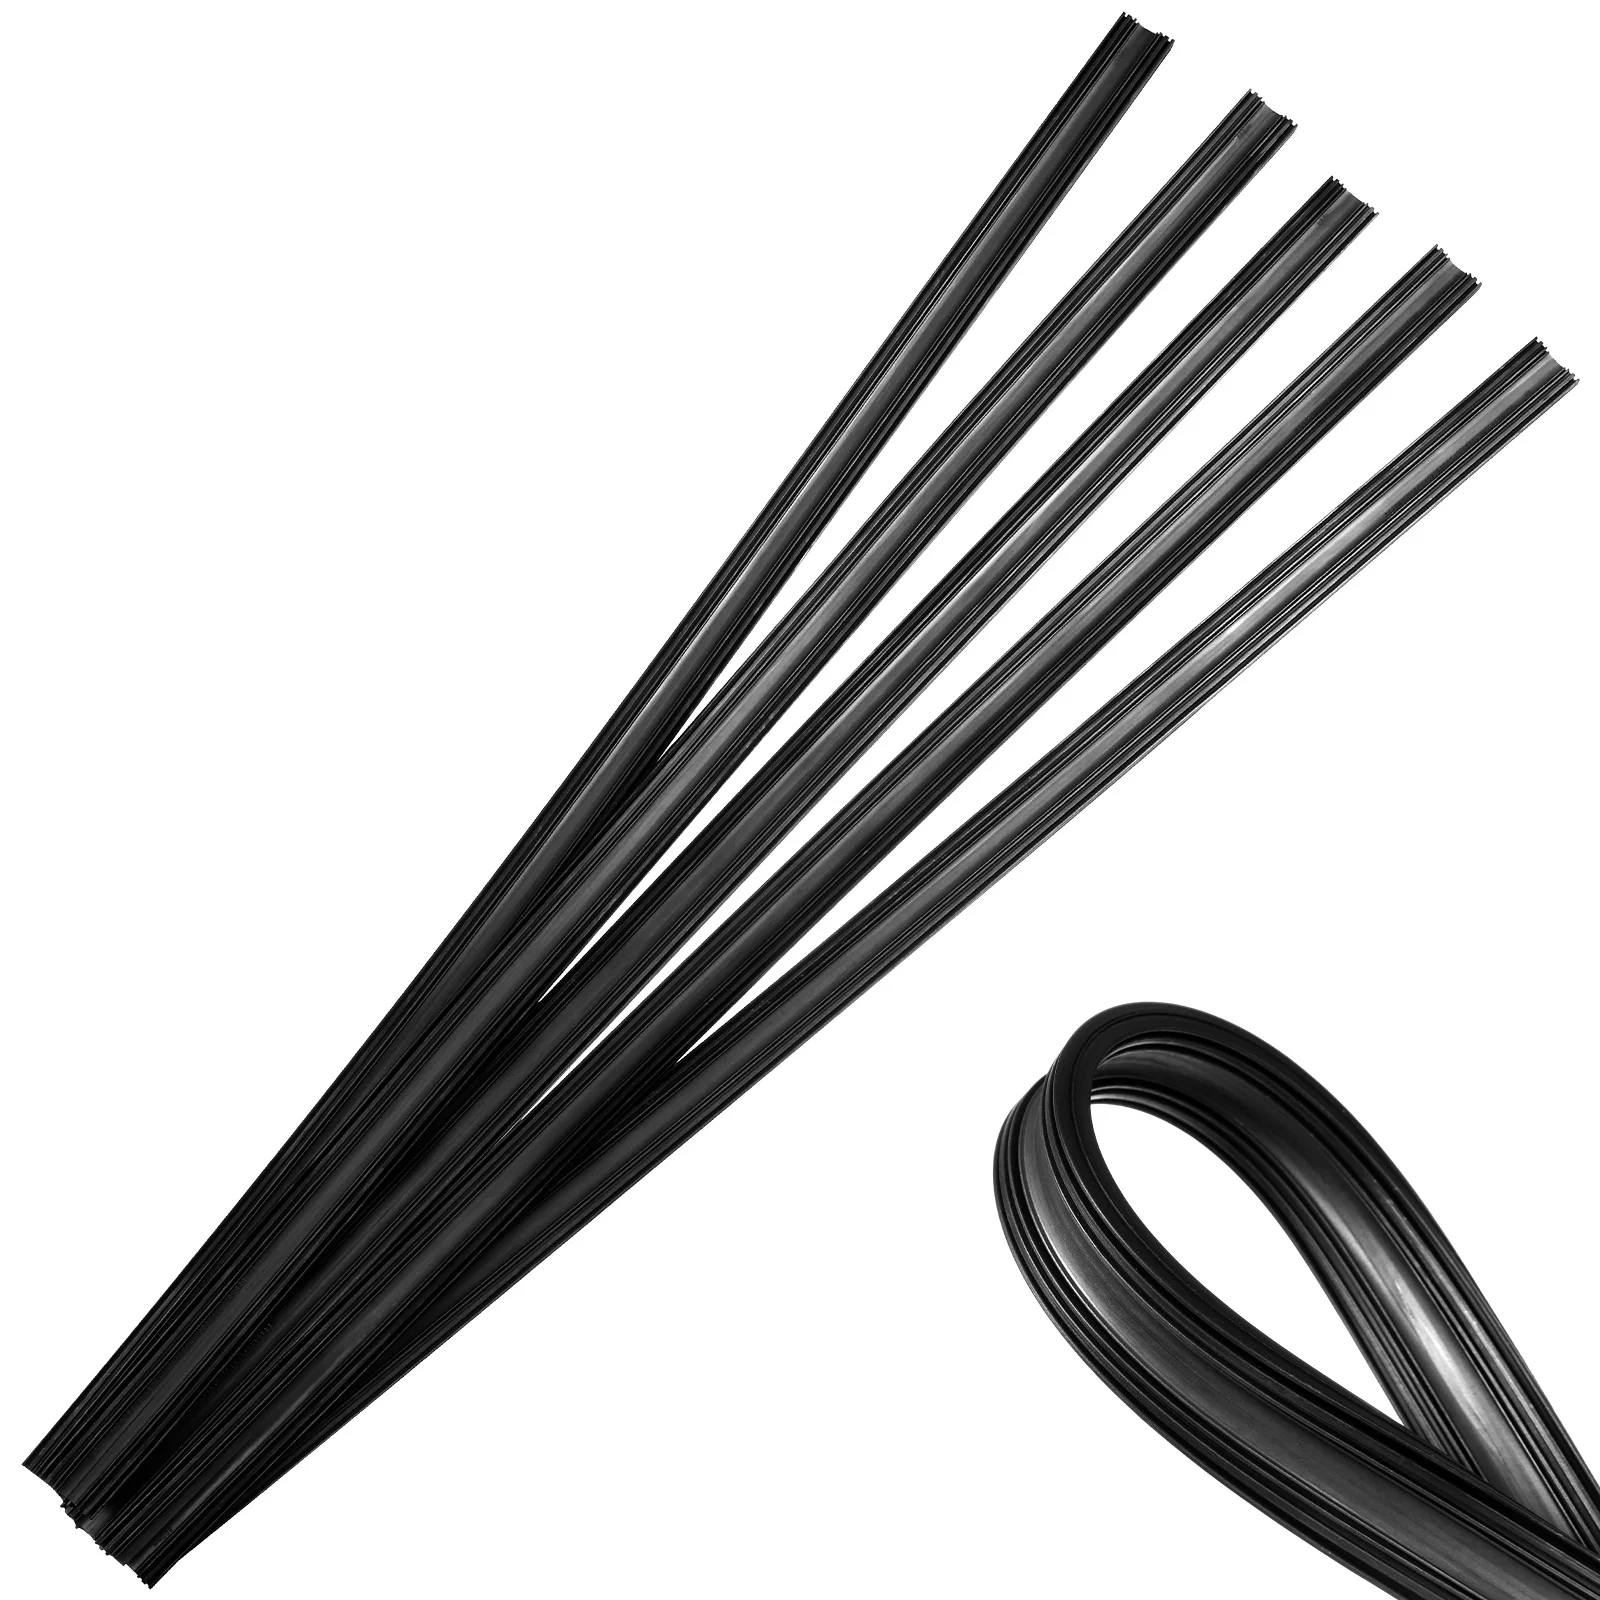 

10 Pcs Windshield Wiper Rubber Strips Frameless Wipers Refills Rubber Replacement Strips for Cars Buses Trucks